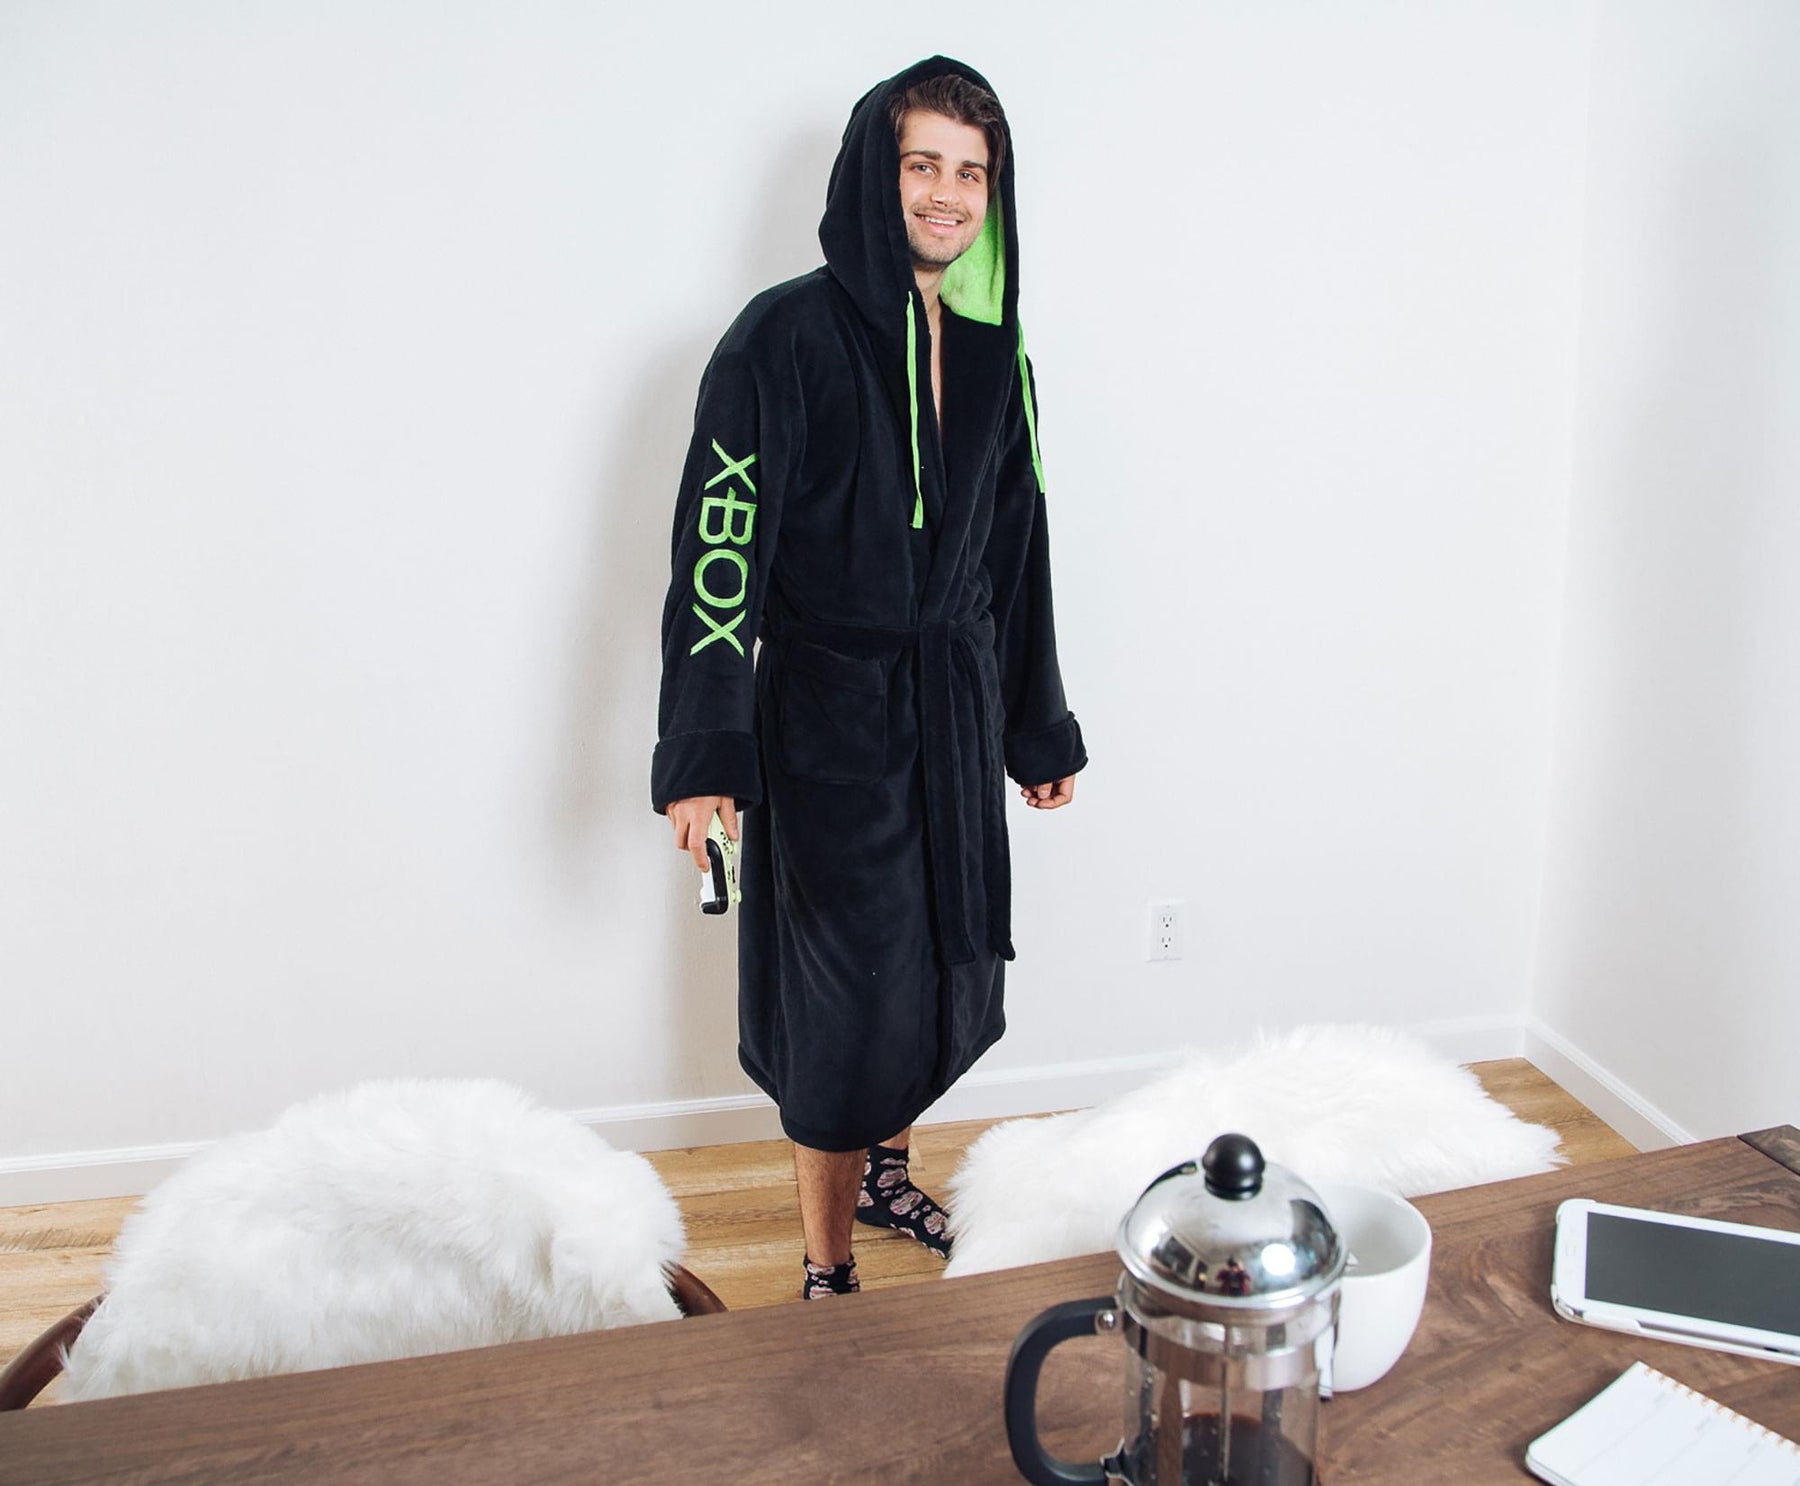 Xbox Gamer Unisex Hooded Fleece Robe for Adults | One Size Fits Most